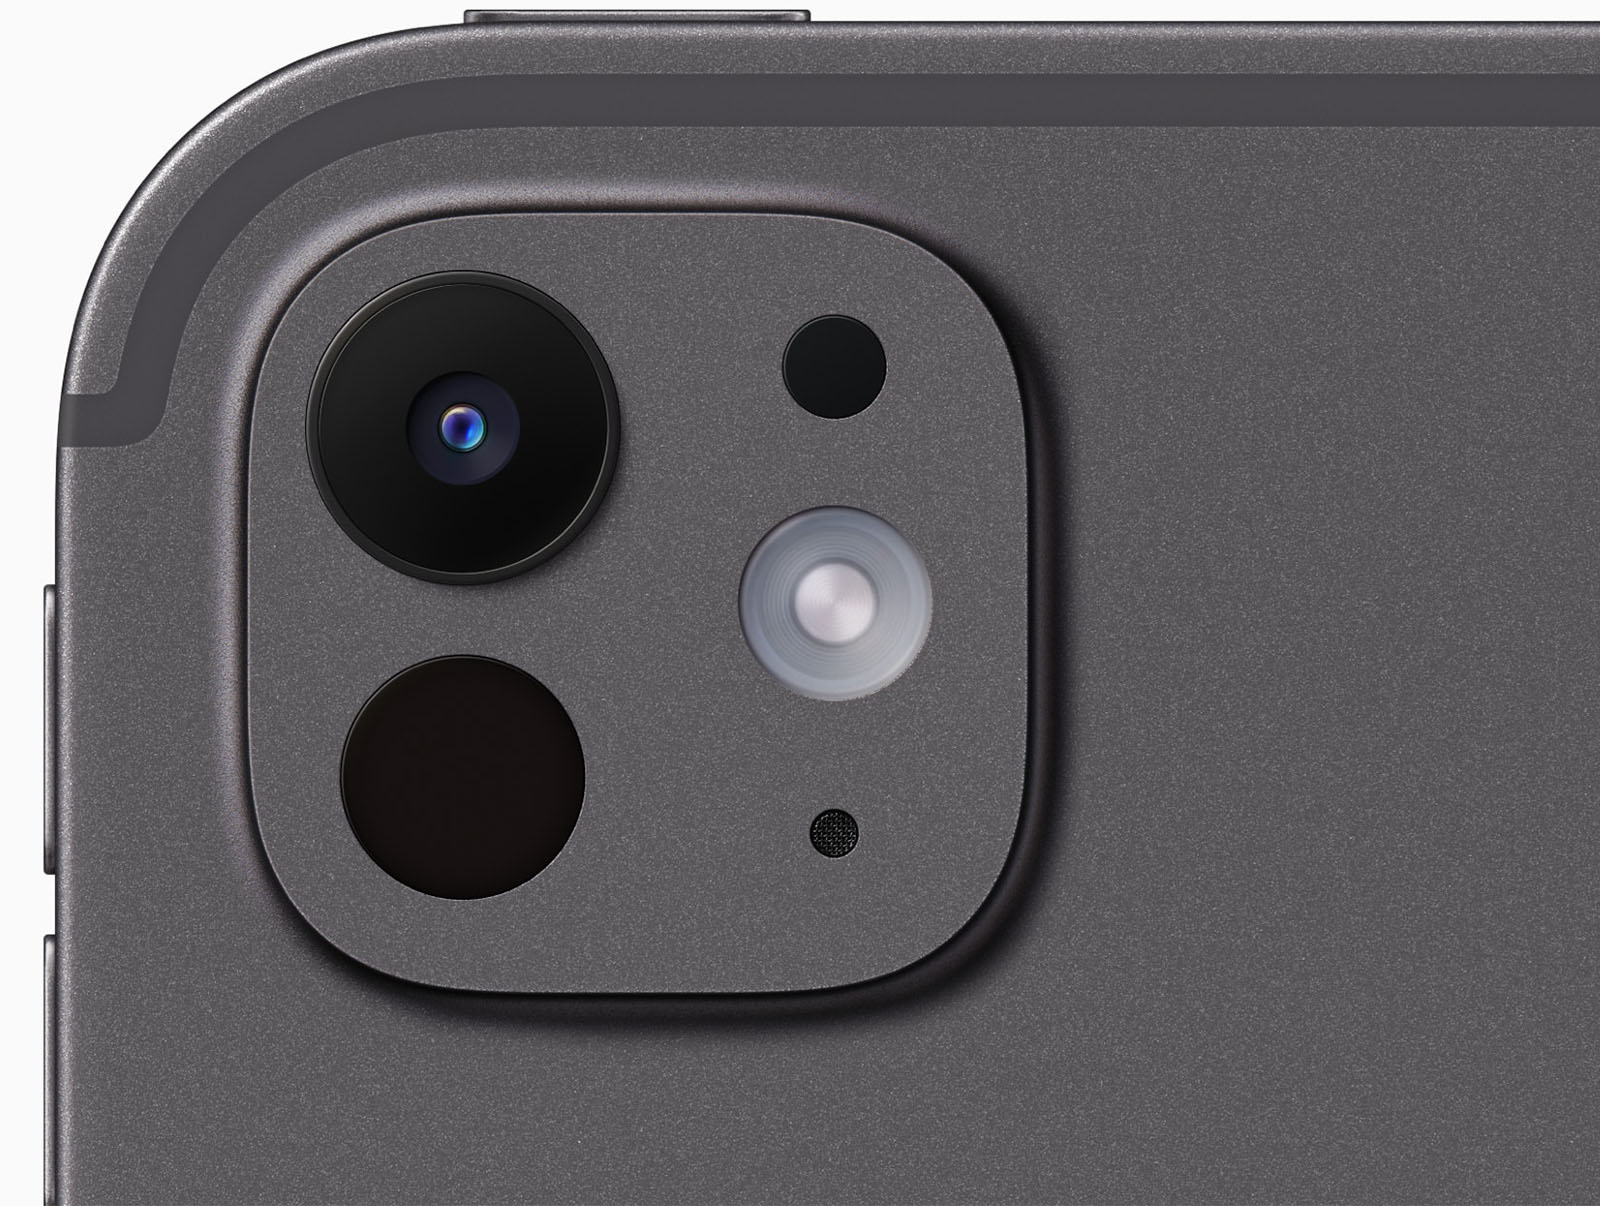 Close-up of a smartphone's dual-camera system on a dark gray metallic surface, showing two lenses, an led flash, and a microphone hole.